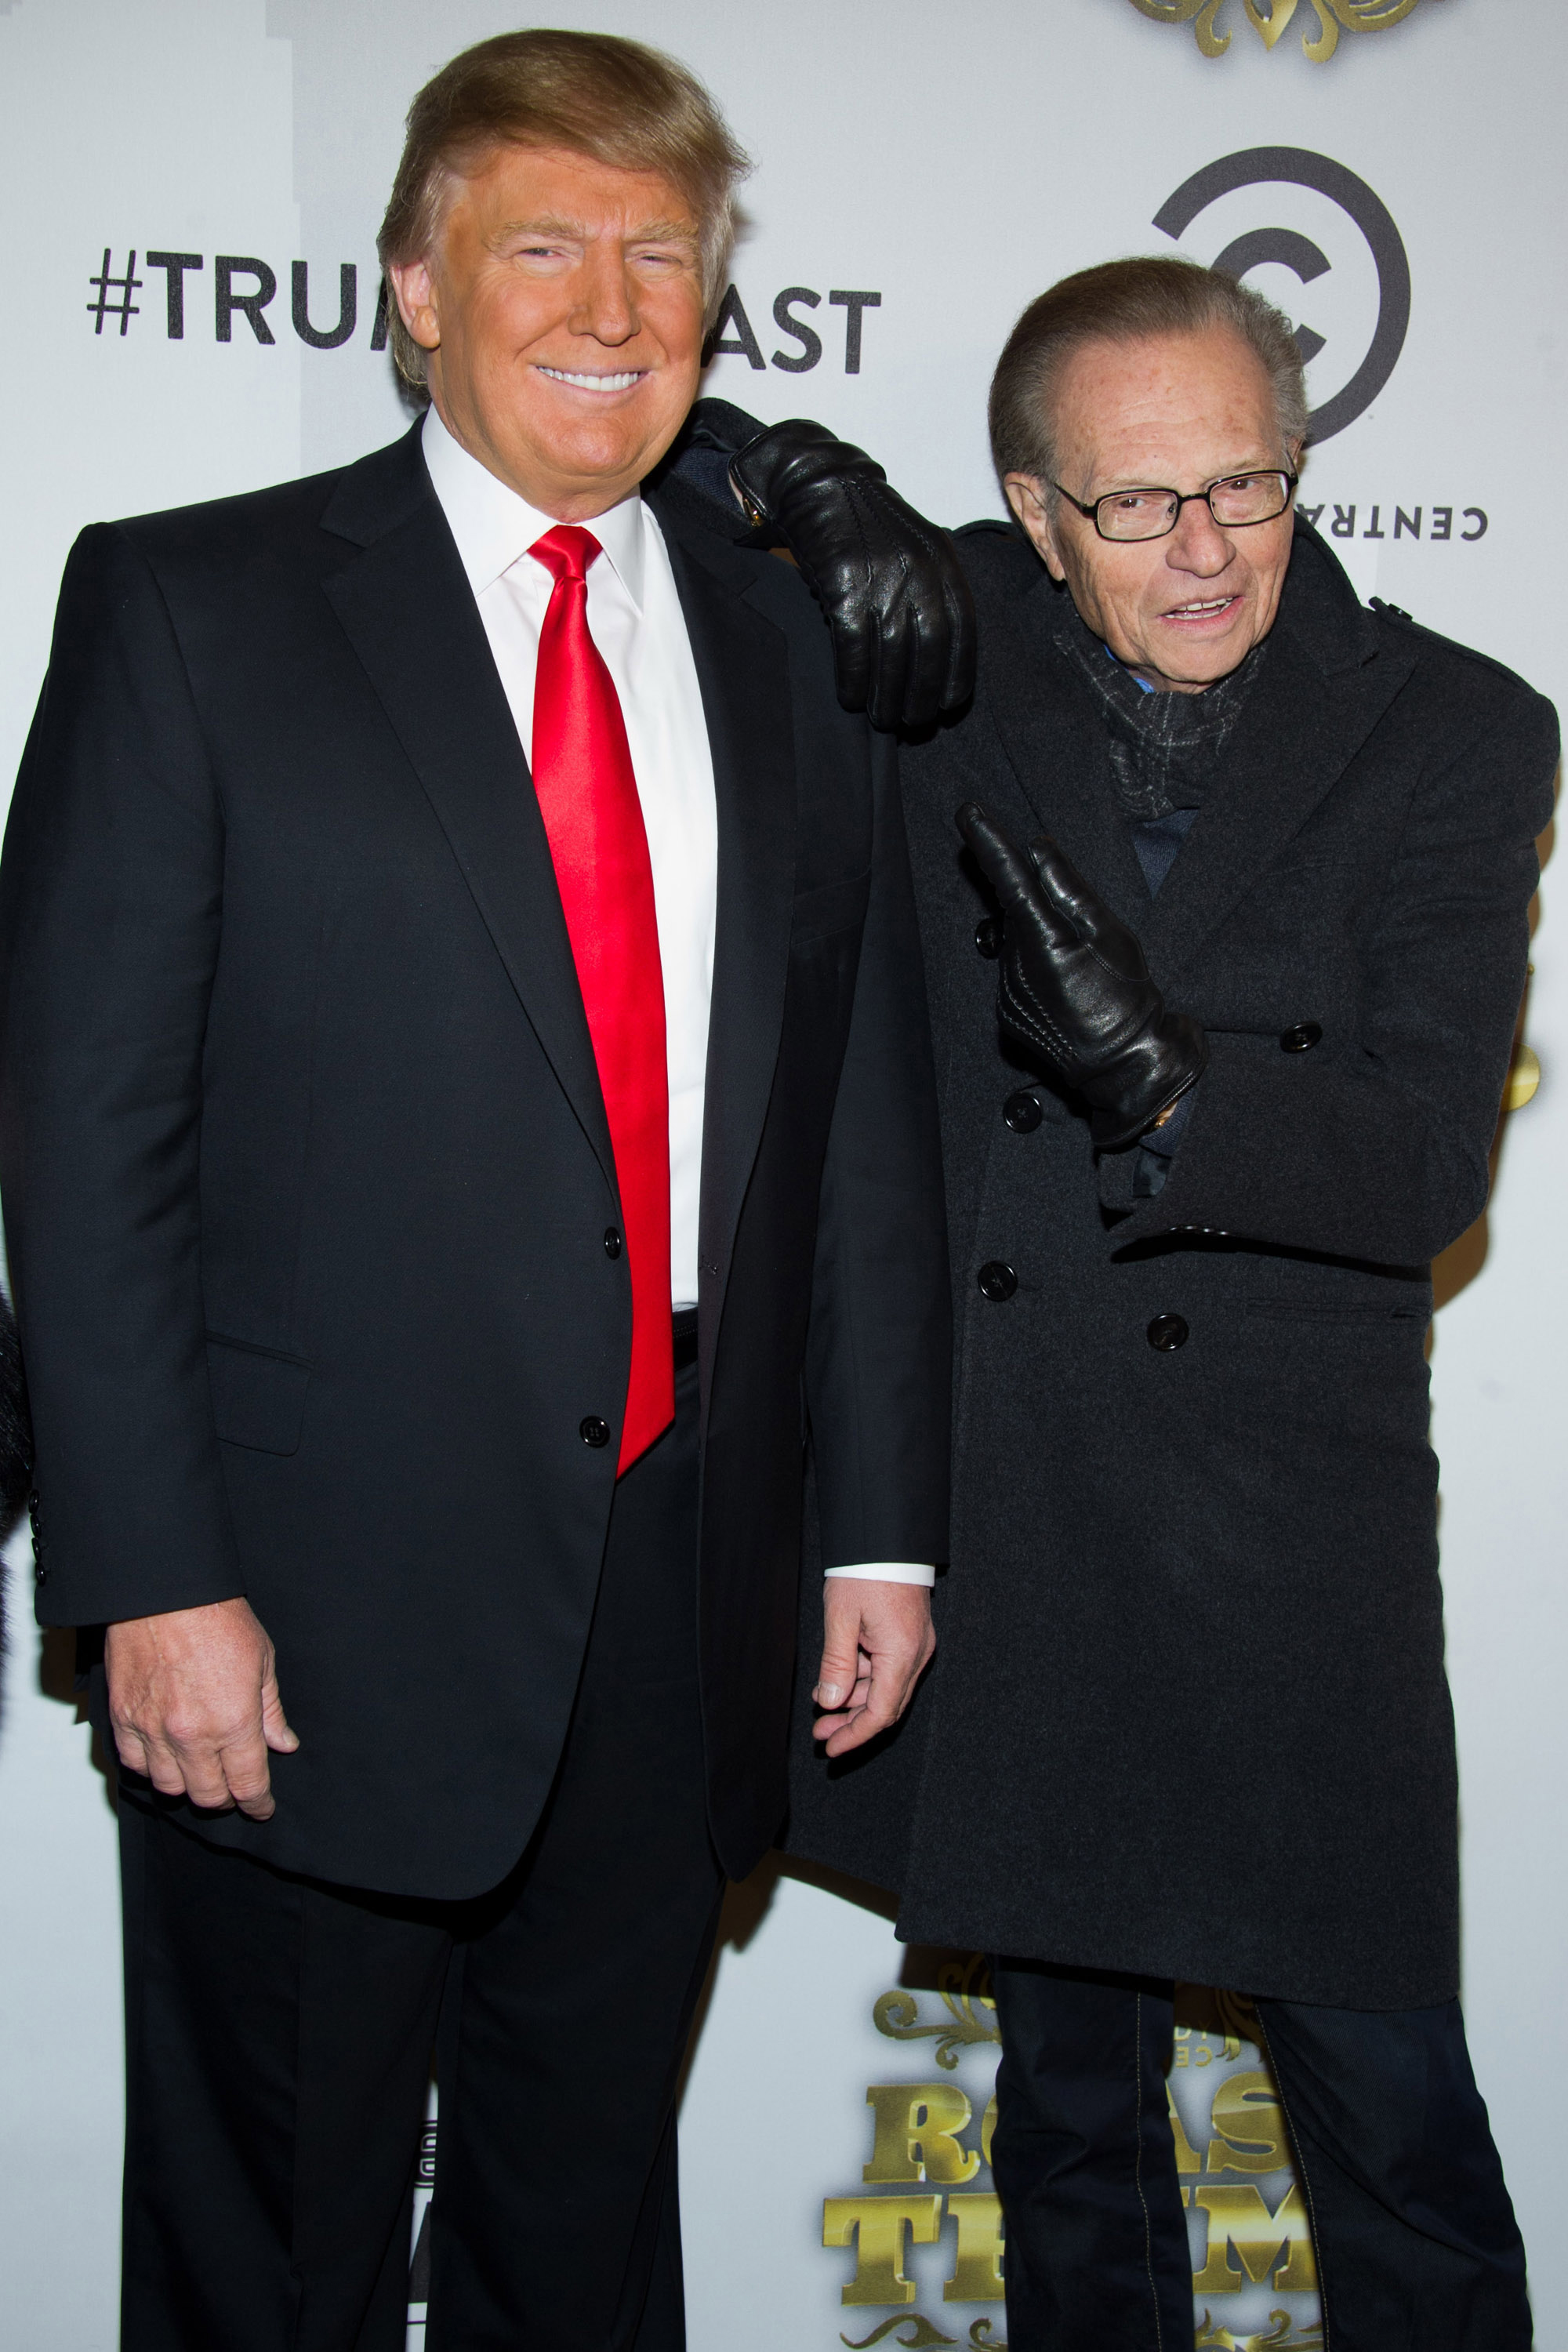 Donald Trump and Larry King arrive at the Comedy Central Roast of Donald Trump in New York on March 9, 2011.